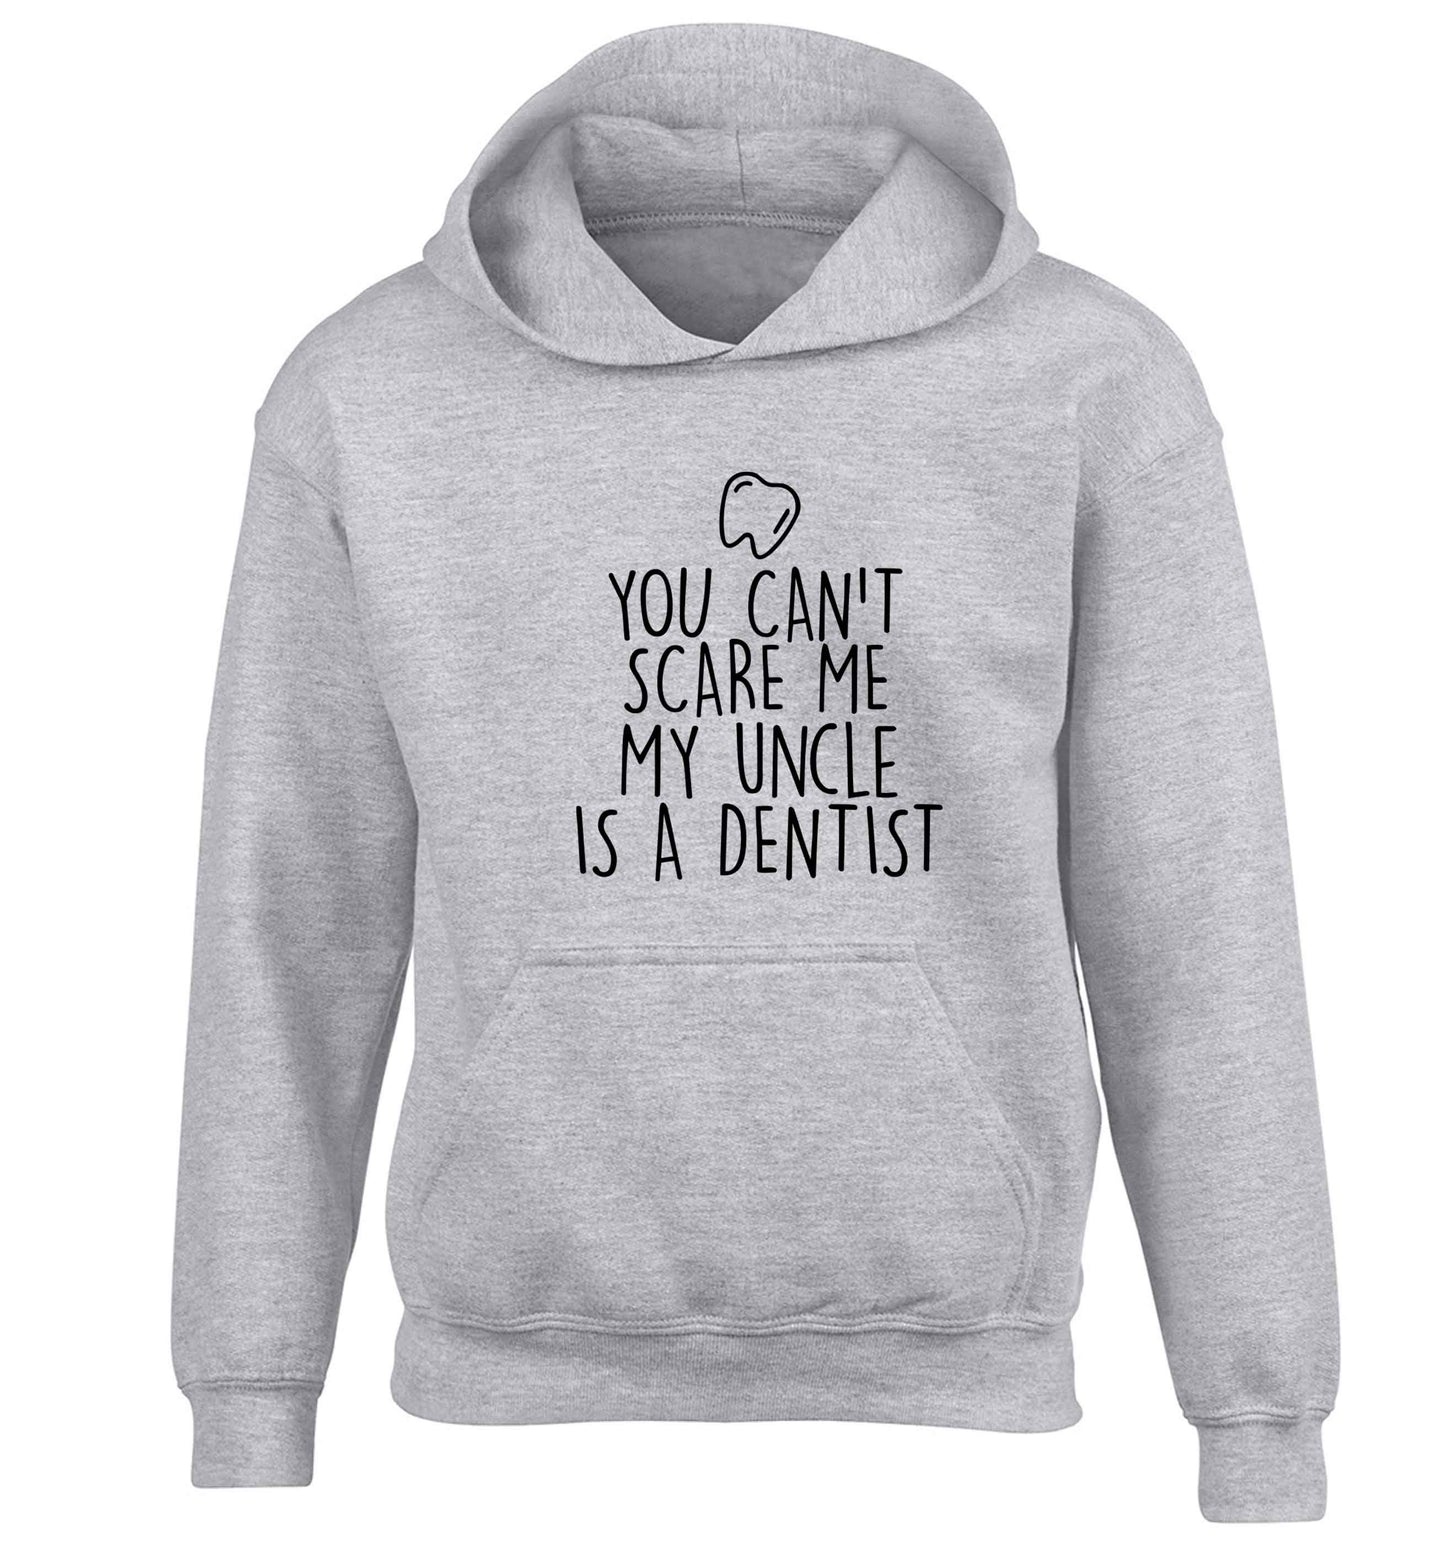 You can't scare me my uncle is a dentist children's grey hoodie 12-13 Years